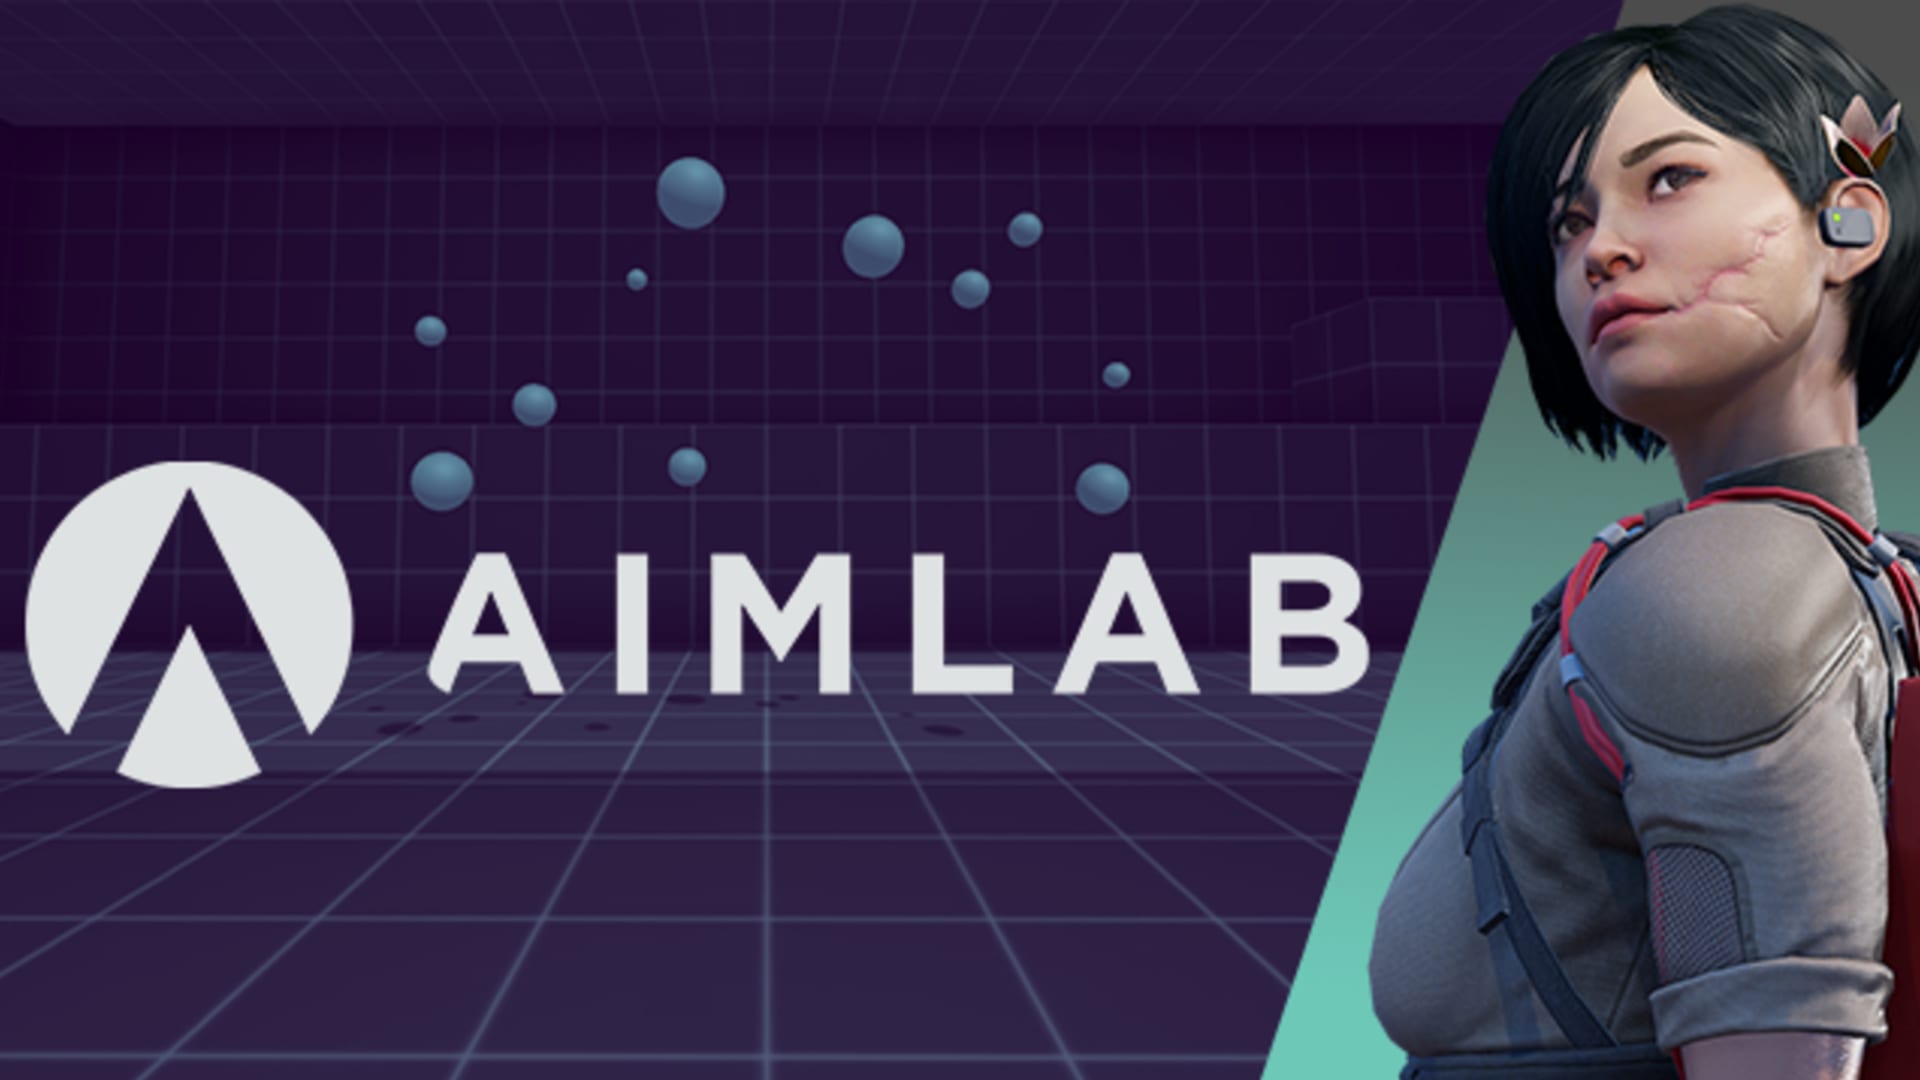 Call of Duty League with Aim Lab as new partner